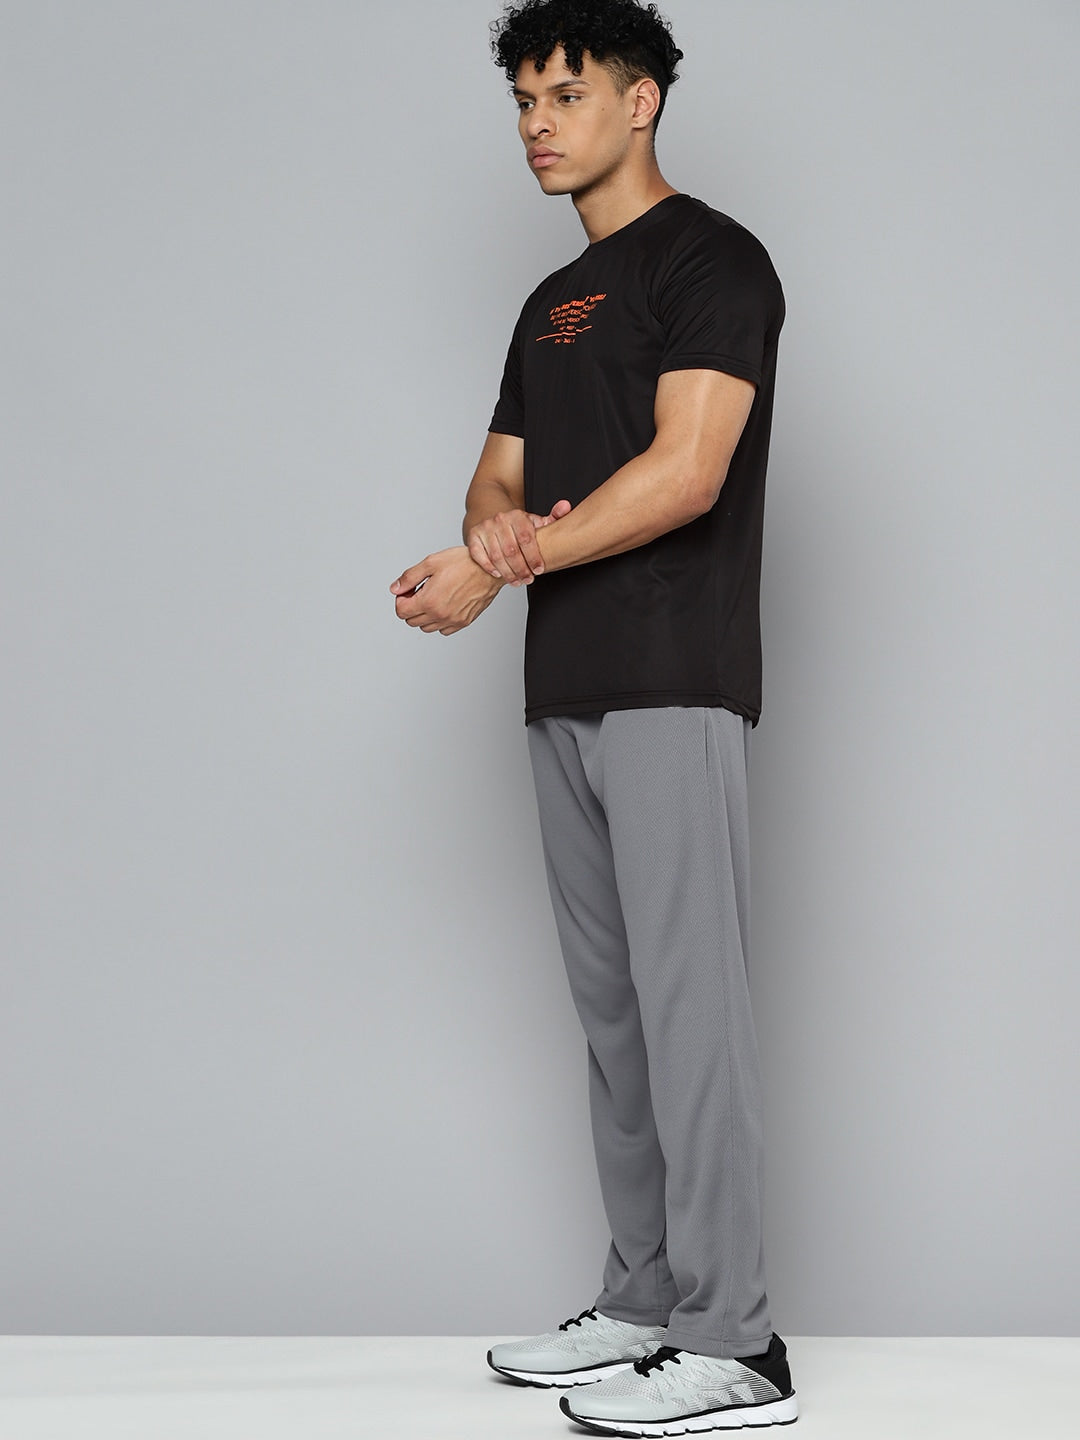 Get Men's Joggers Pant Navy Blue Online for Running & Workout – Flush  Fashion